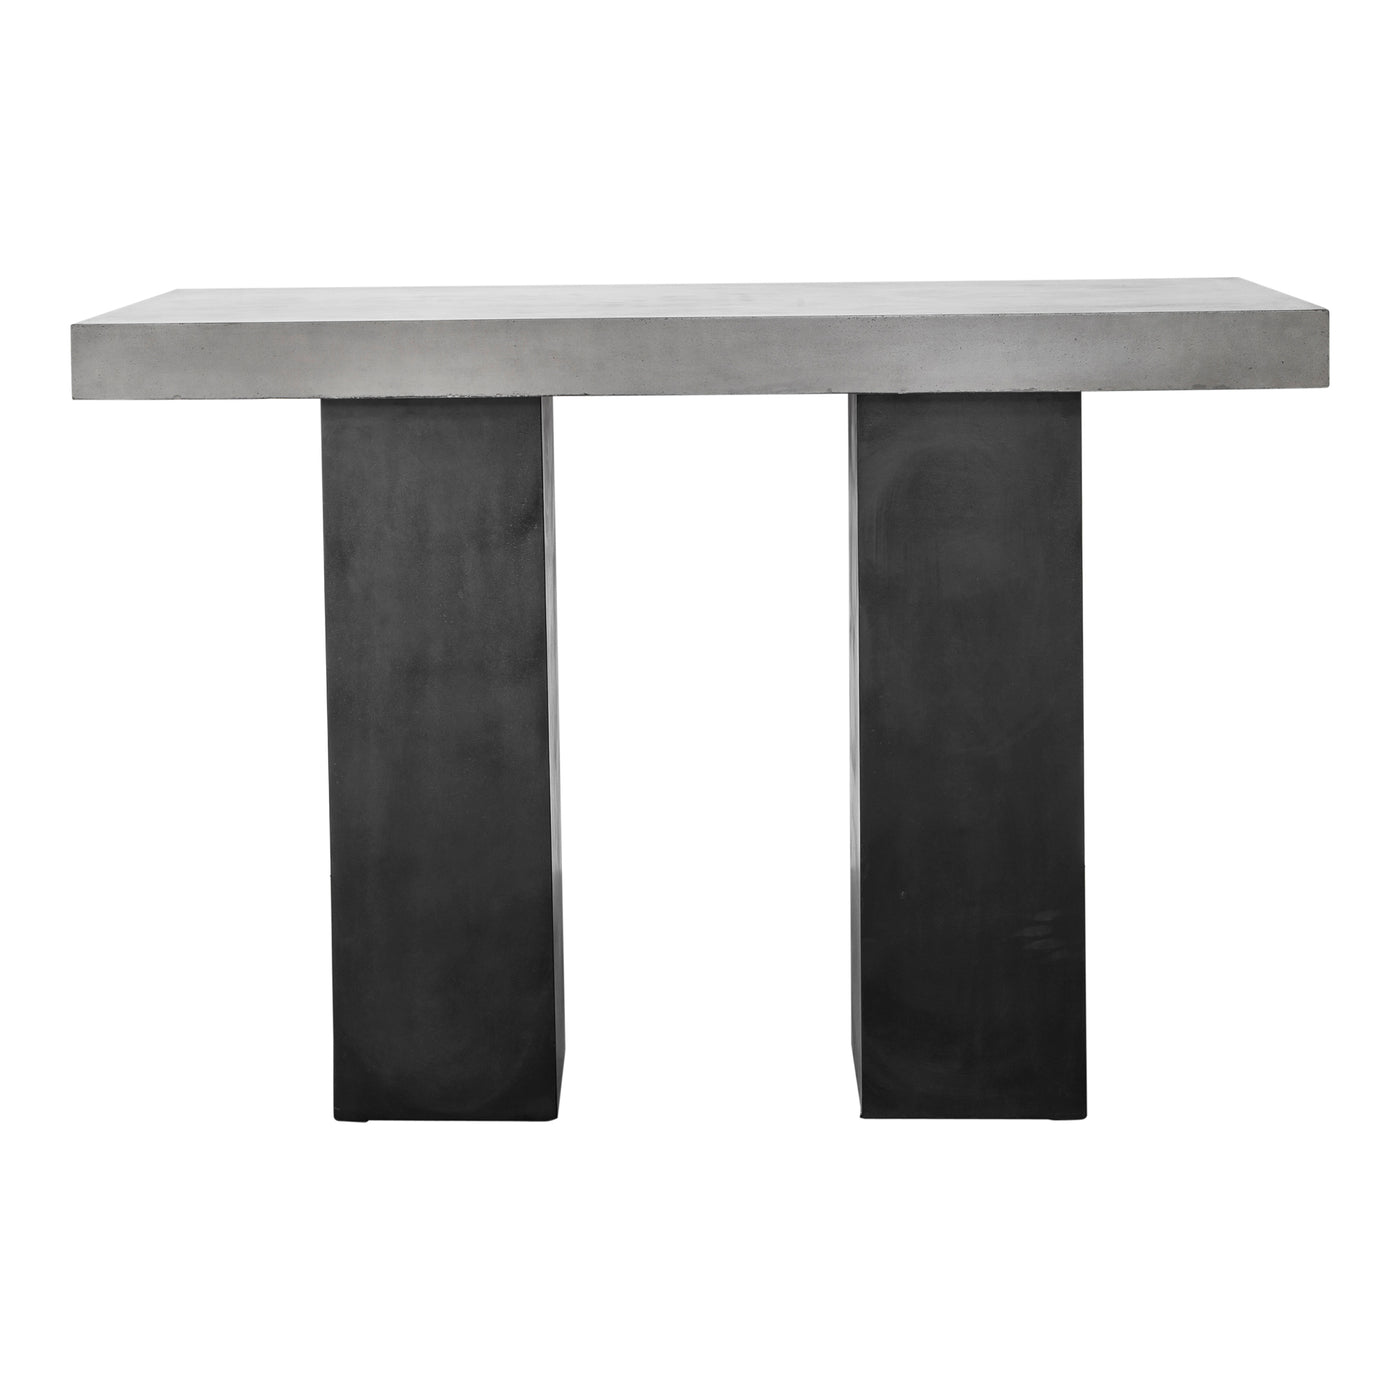 The Lithic Outdoor Bar Table offers a smooth, versatile design for your backyard or patio. Fiber reinforced natural concre...